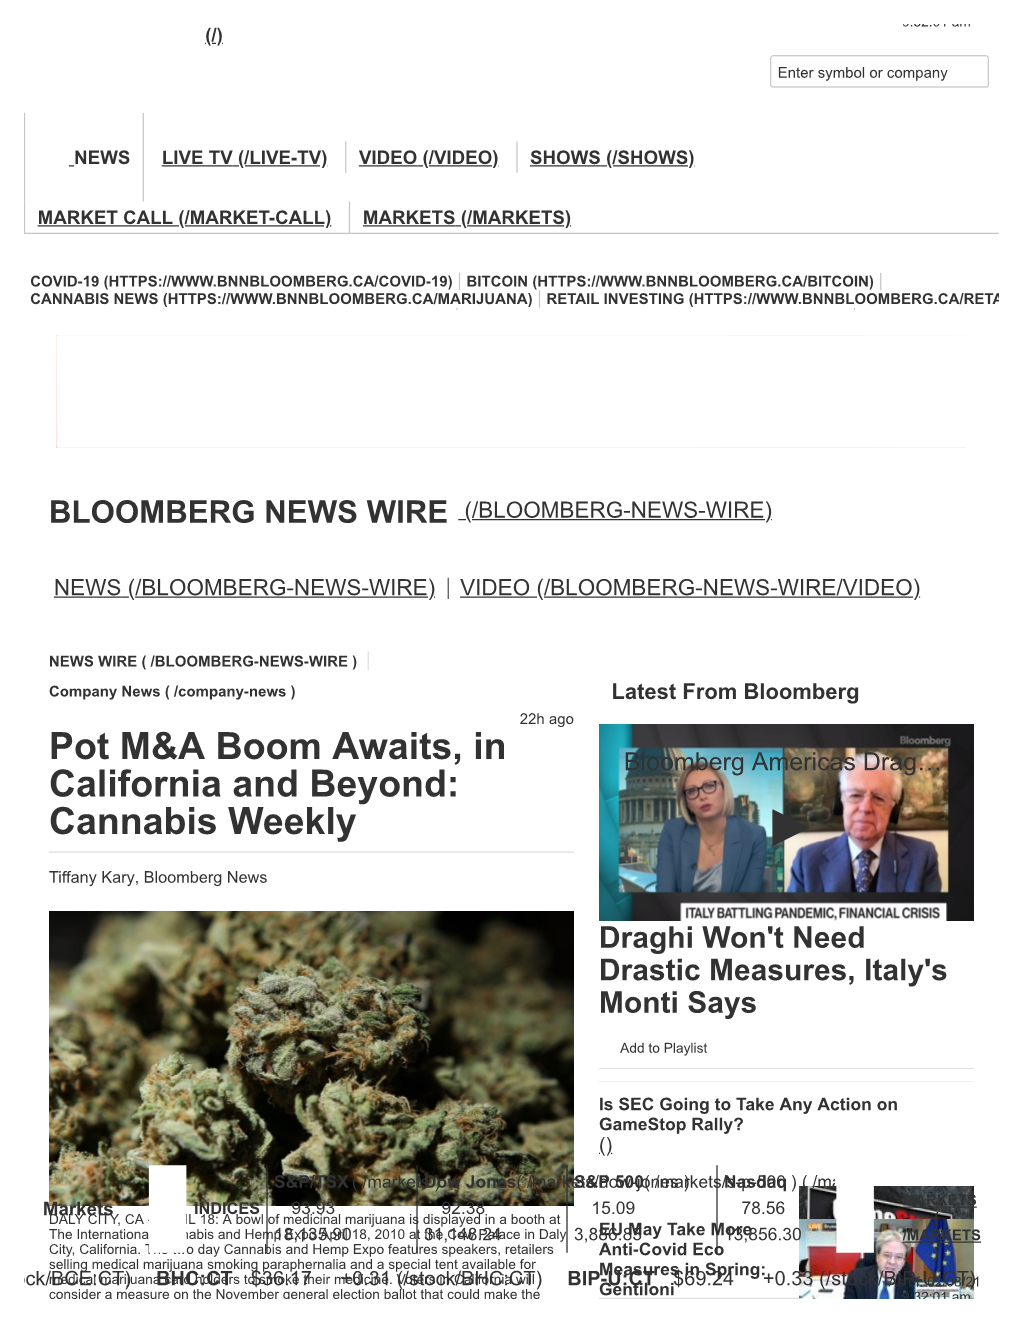 Pot M&A Boom Awaits, in California and Beyond: Cannabis Weekly